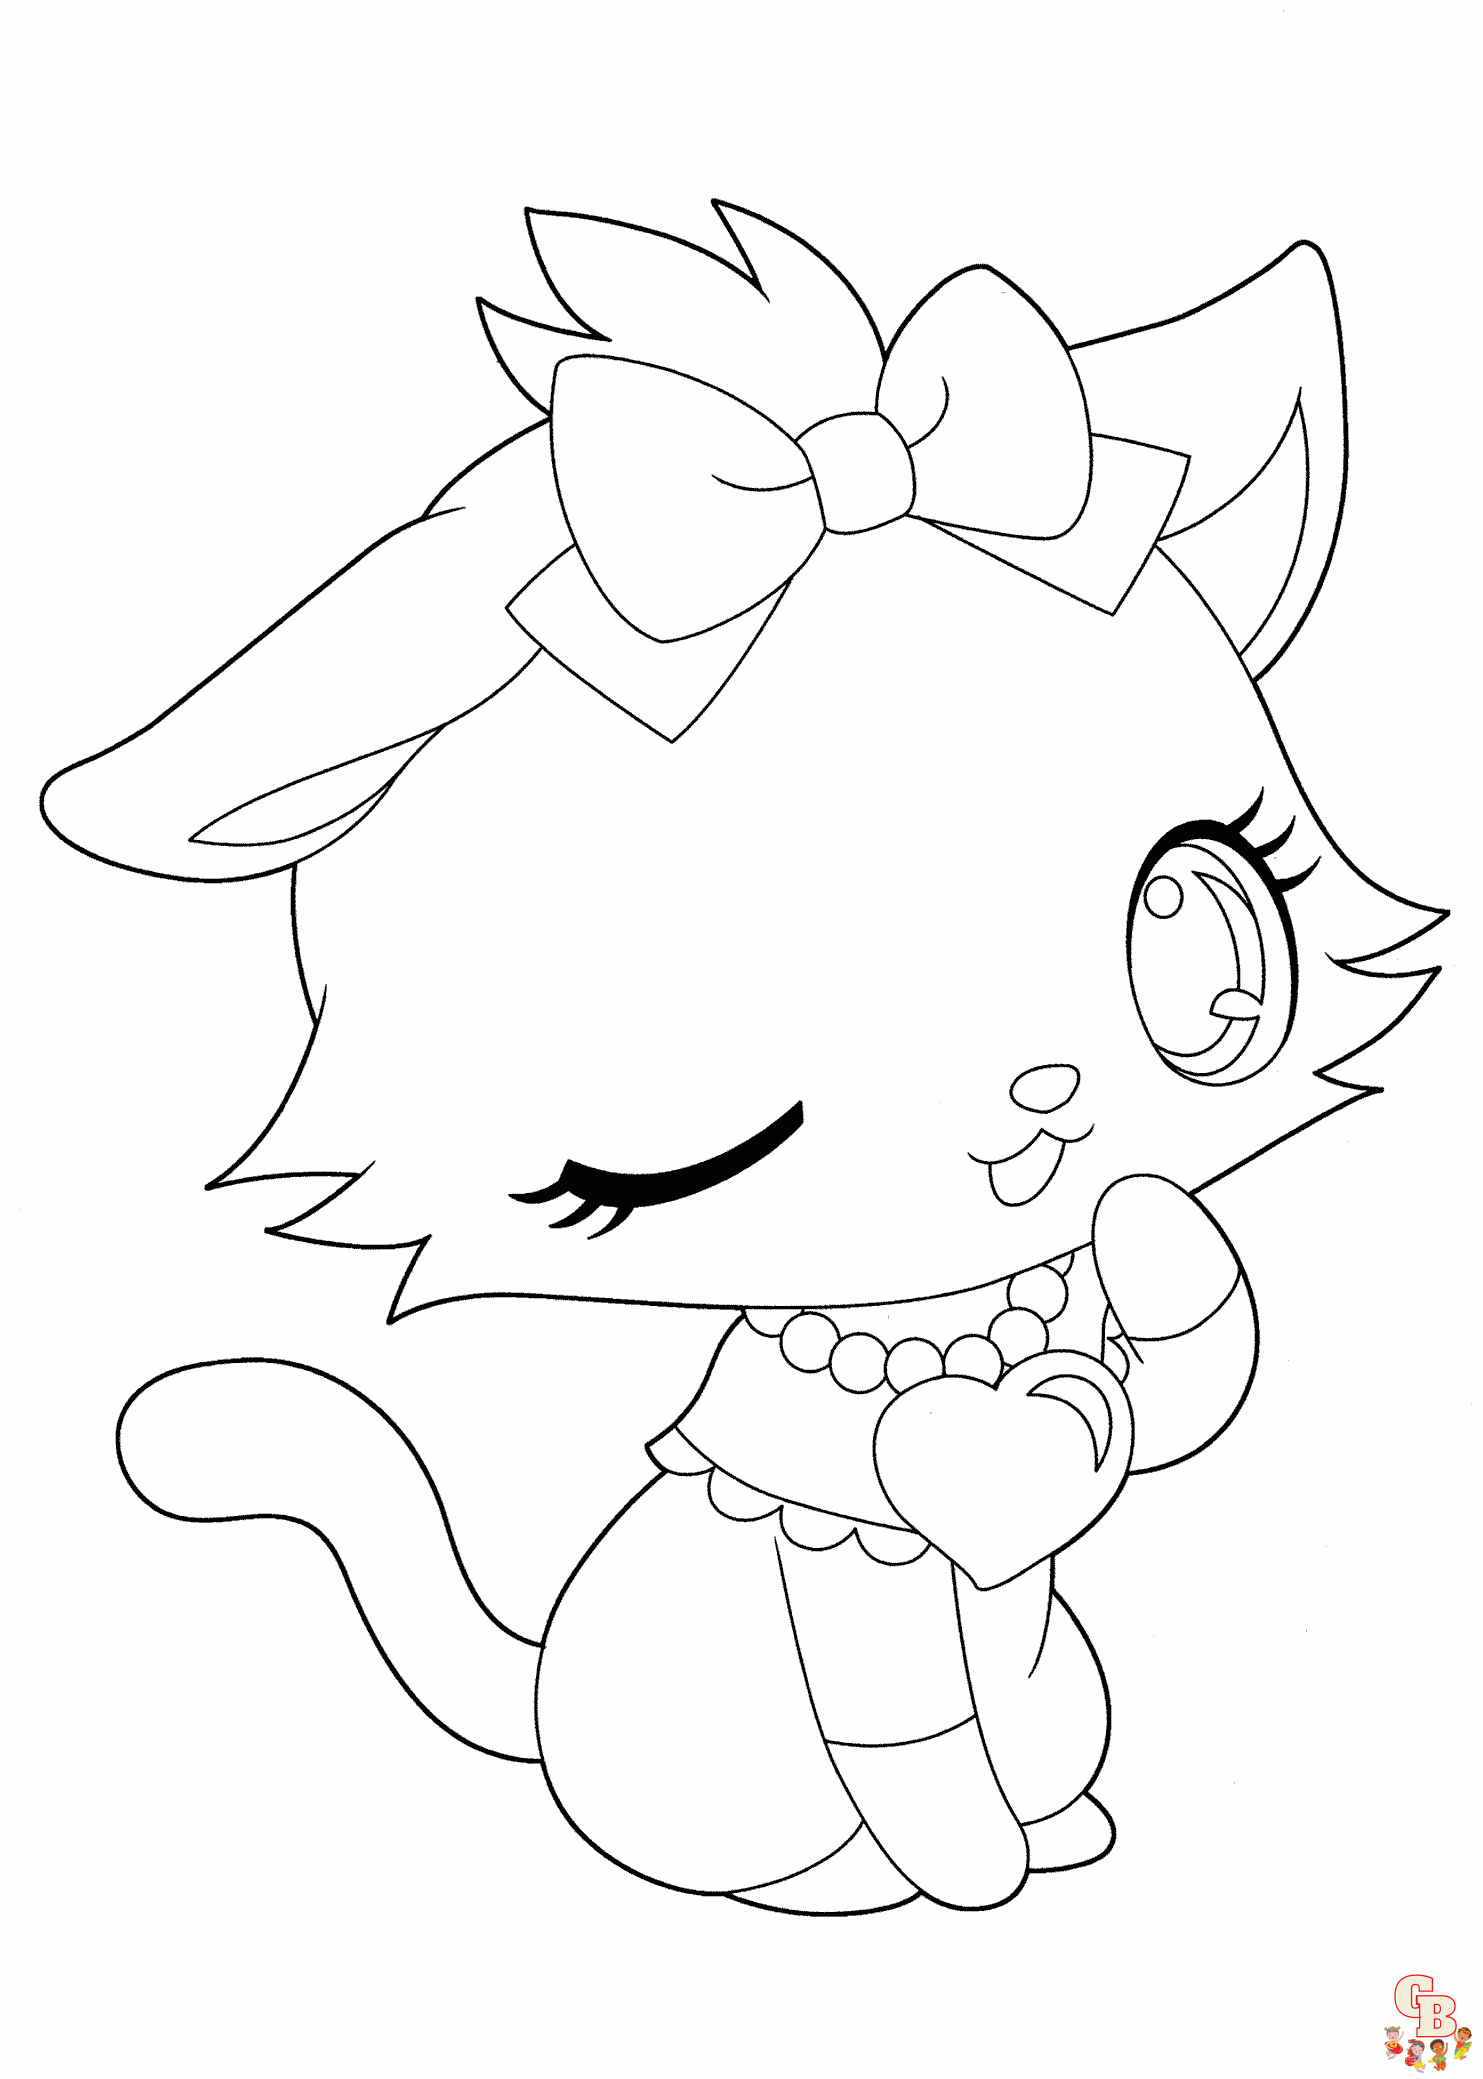 Cat girl colored coloring page by nekoking12 on DeviantArt